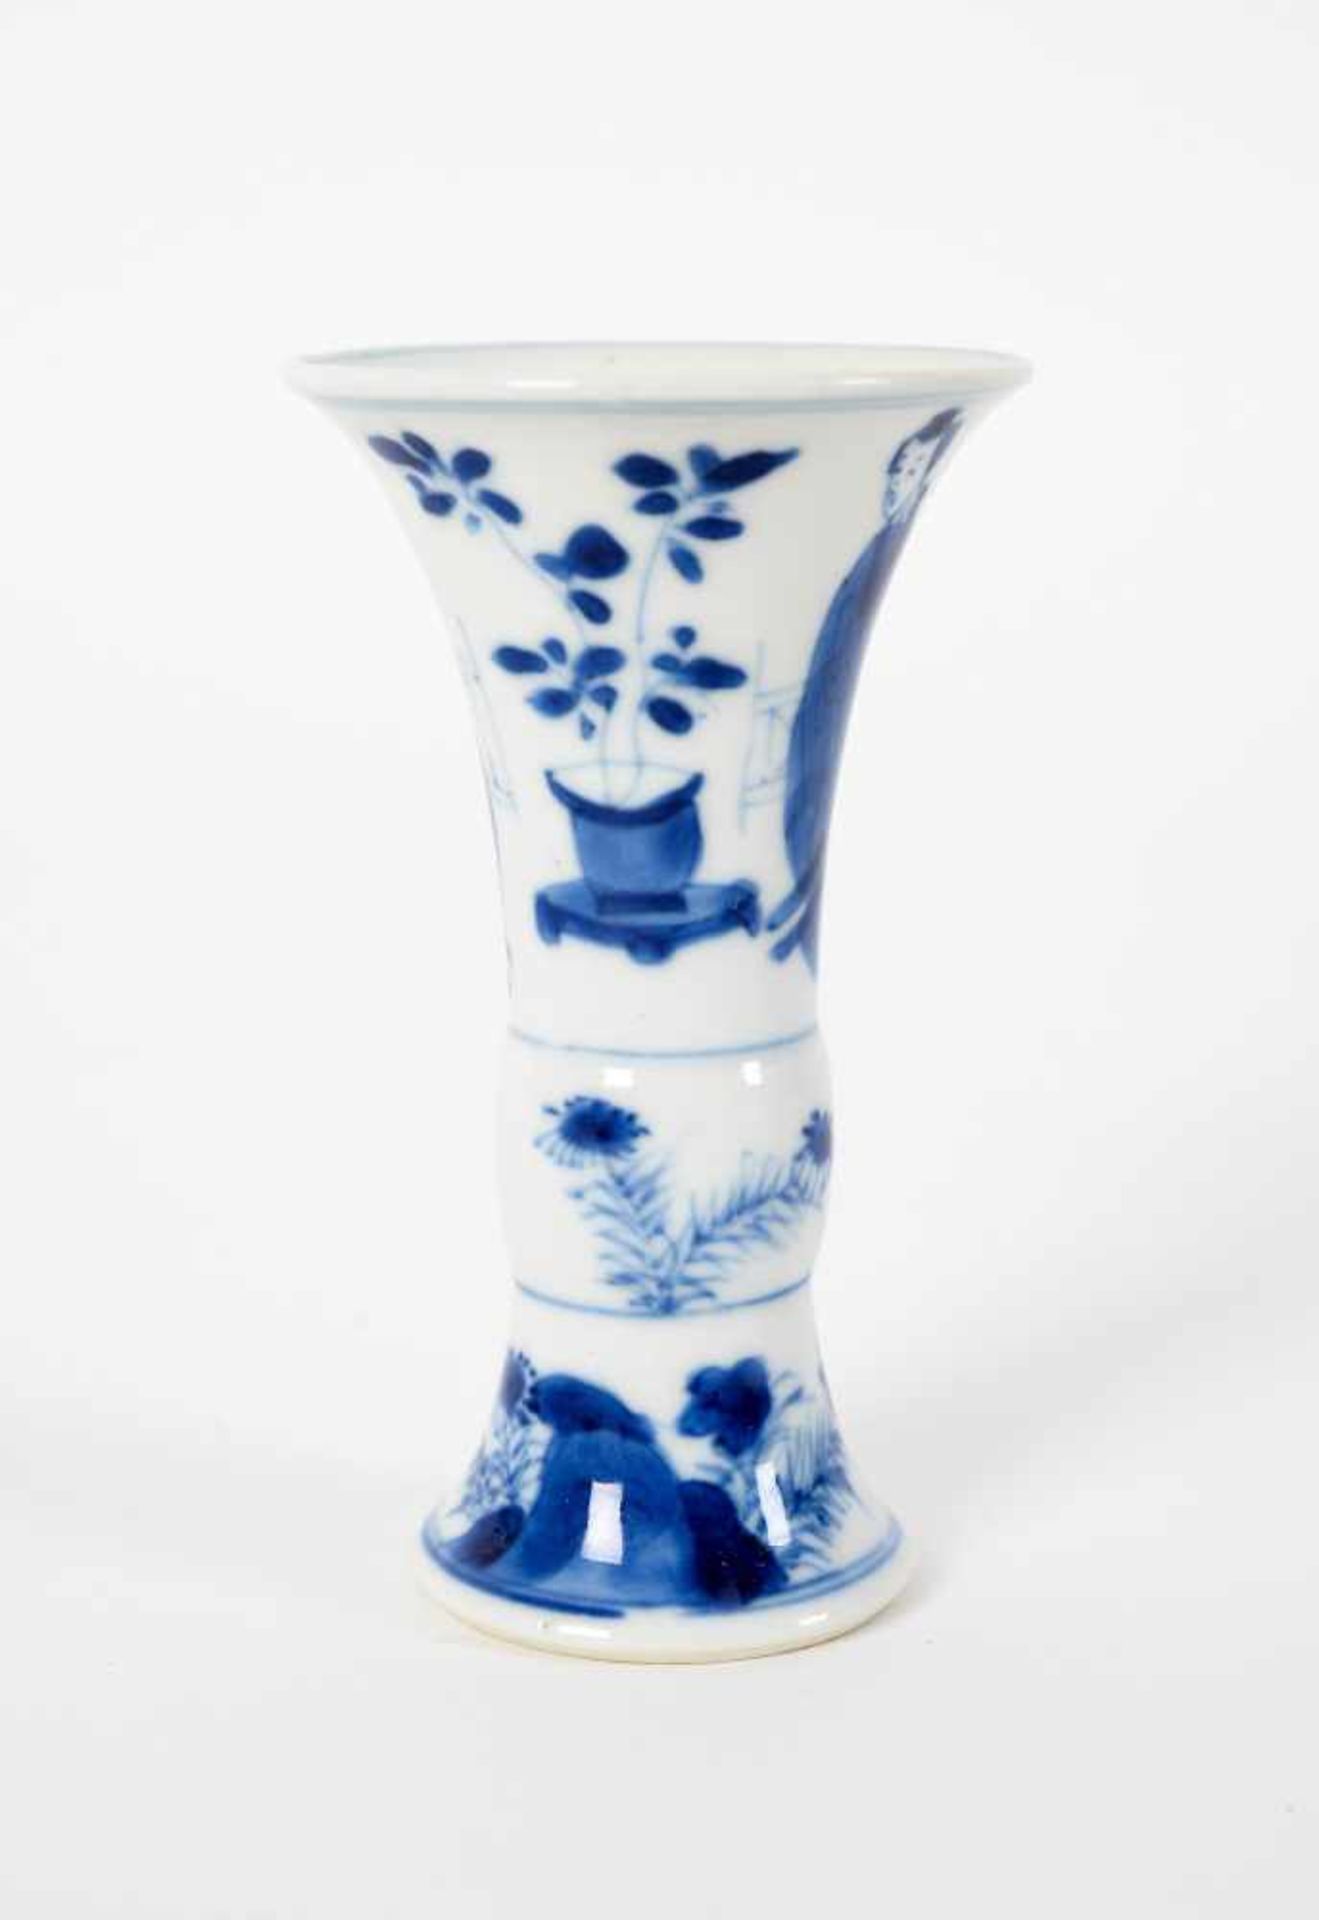 Lot of three diverse blue and white porcelain miniature vases, decorated with flowers, figures, - Image 7 of 14